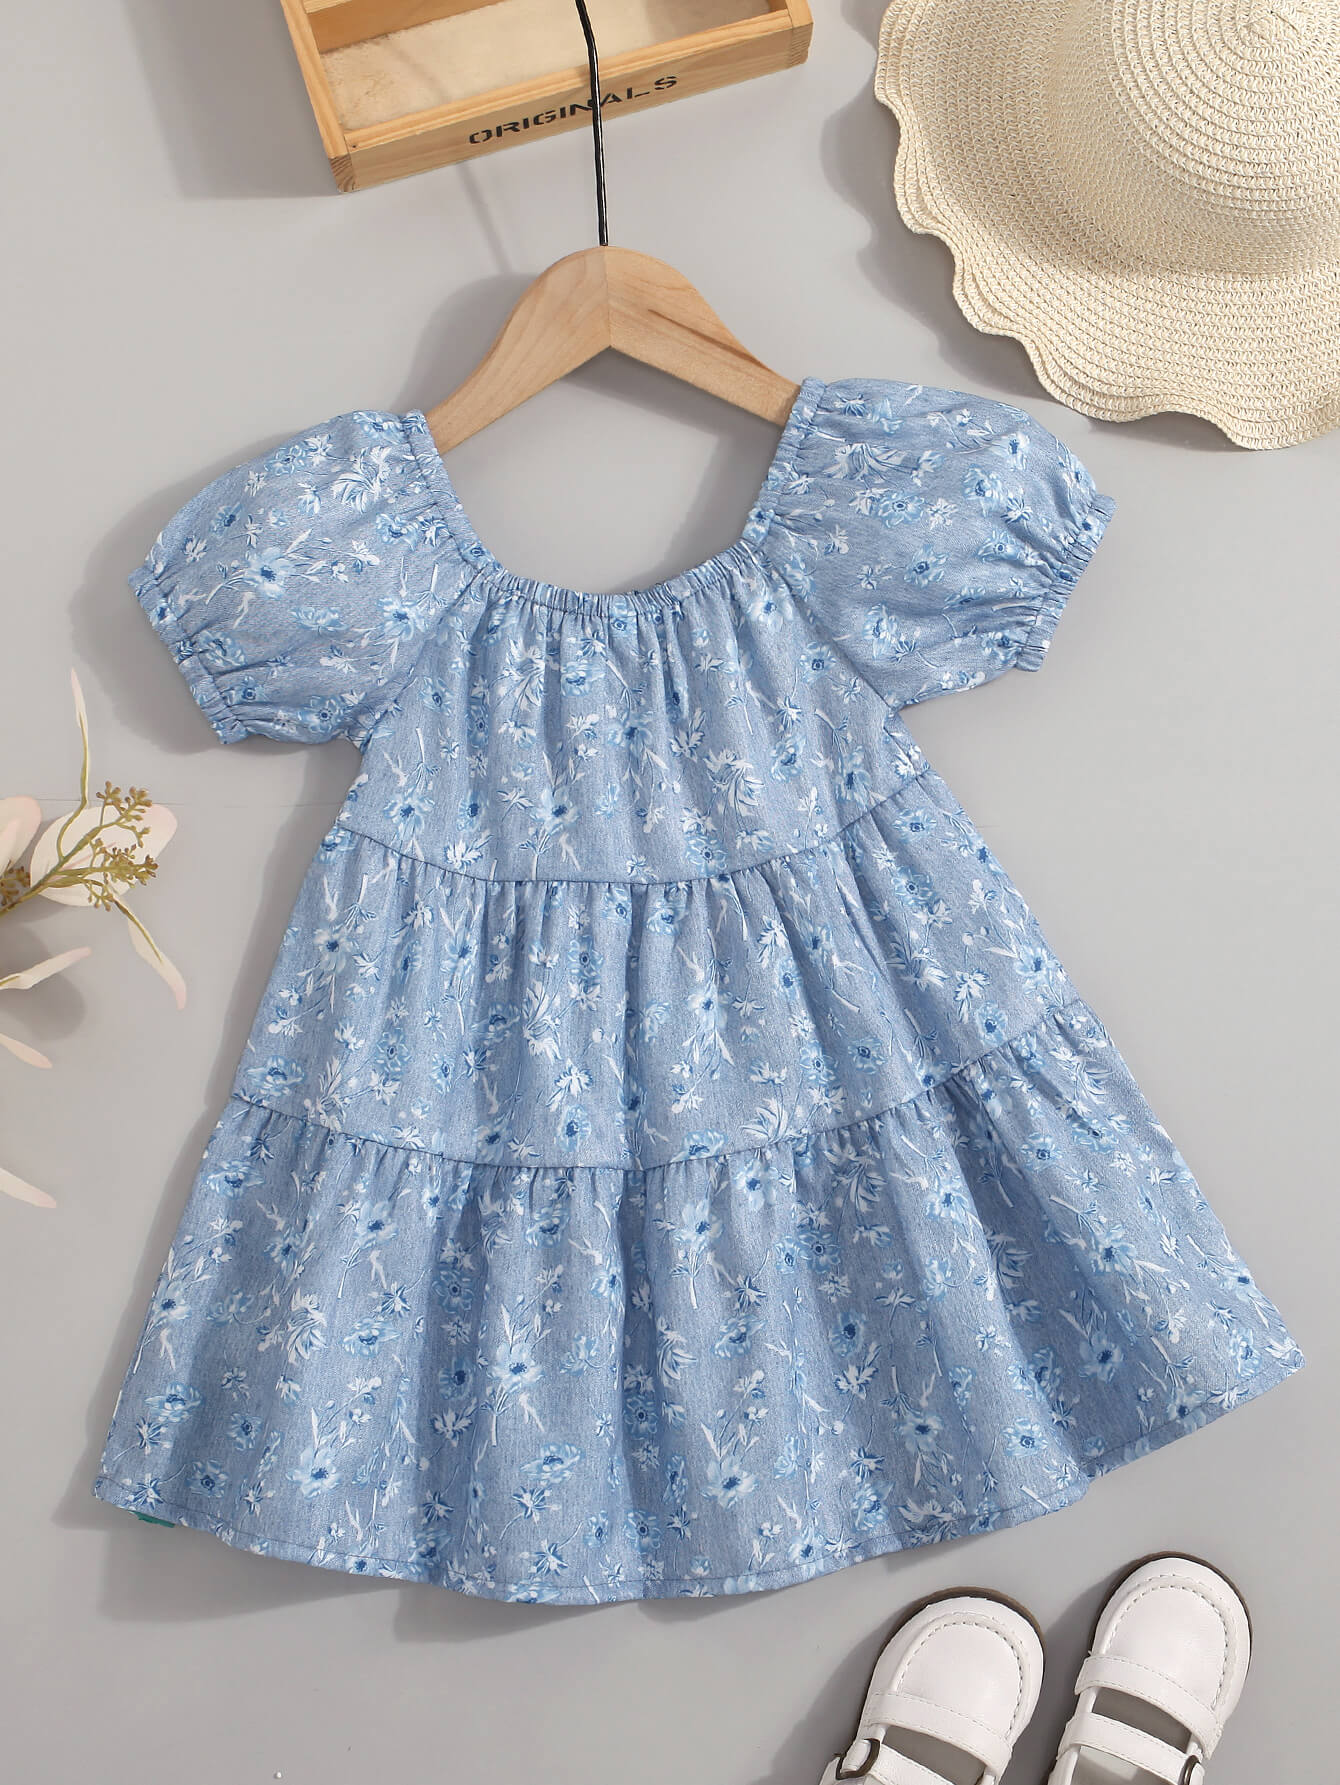 Girls Ditsy Floral Tiered Dress 1y-6y - Fashion Girl Online Store